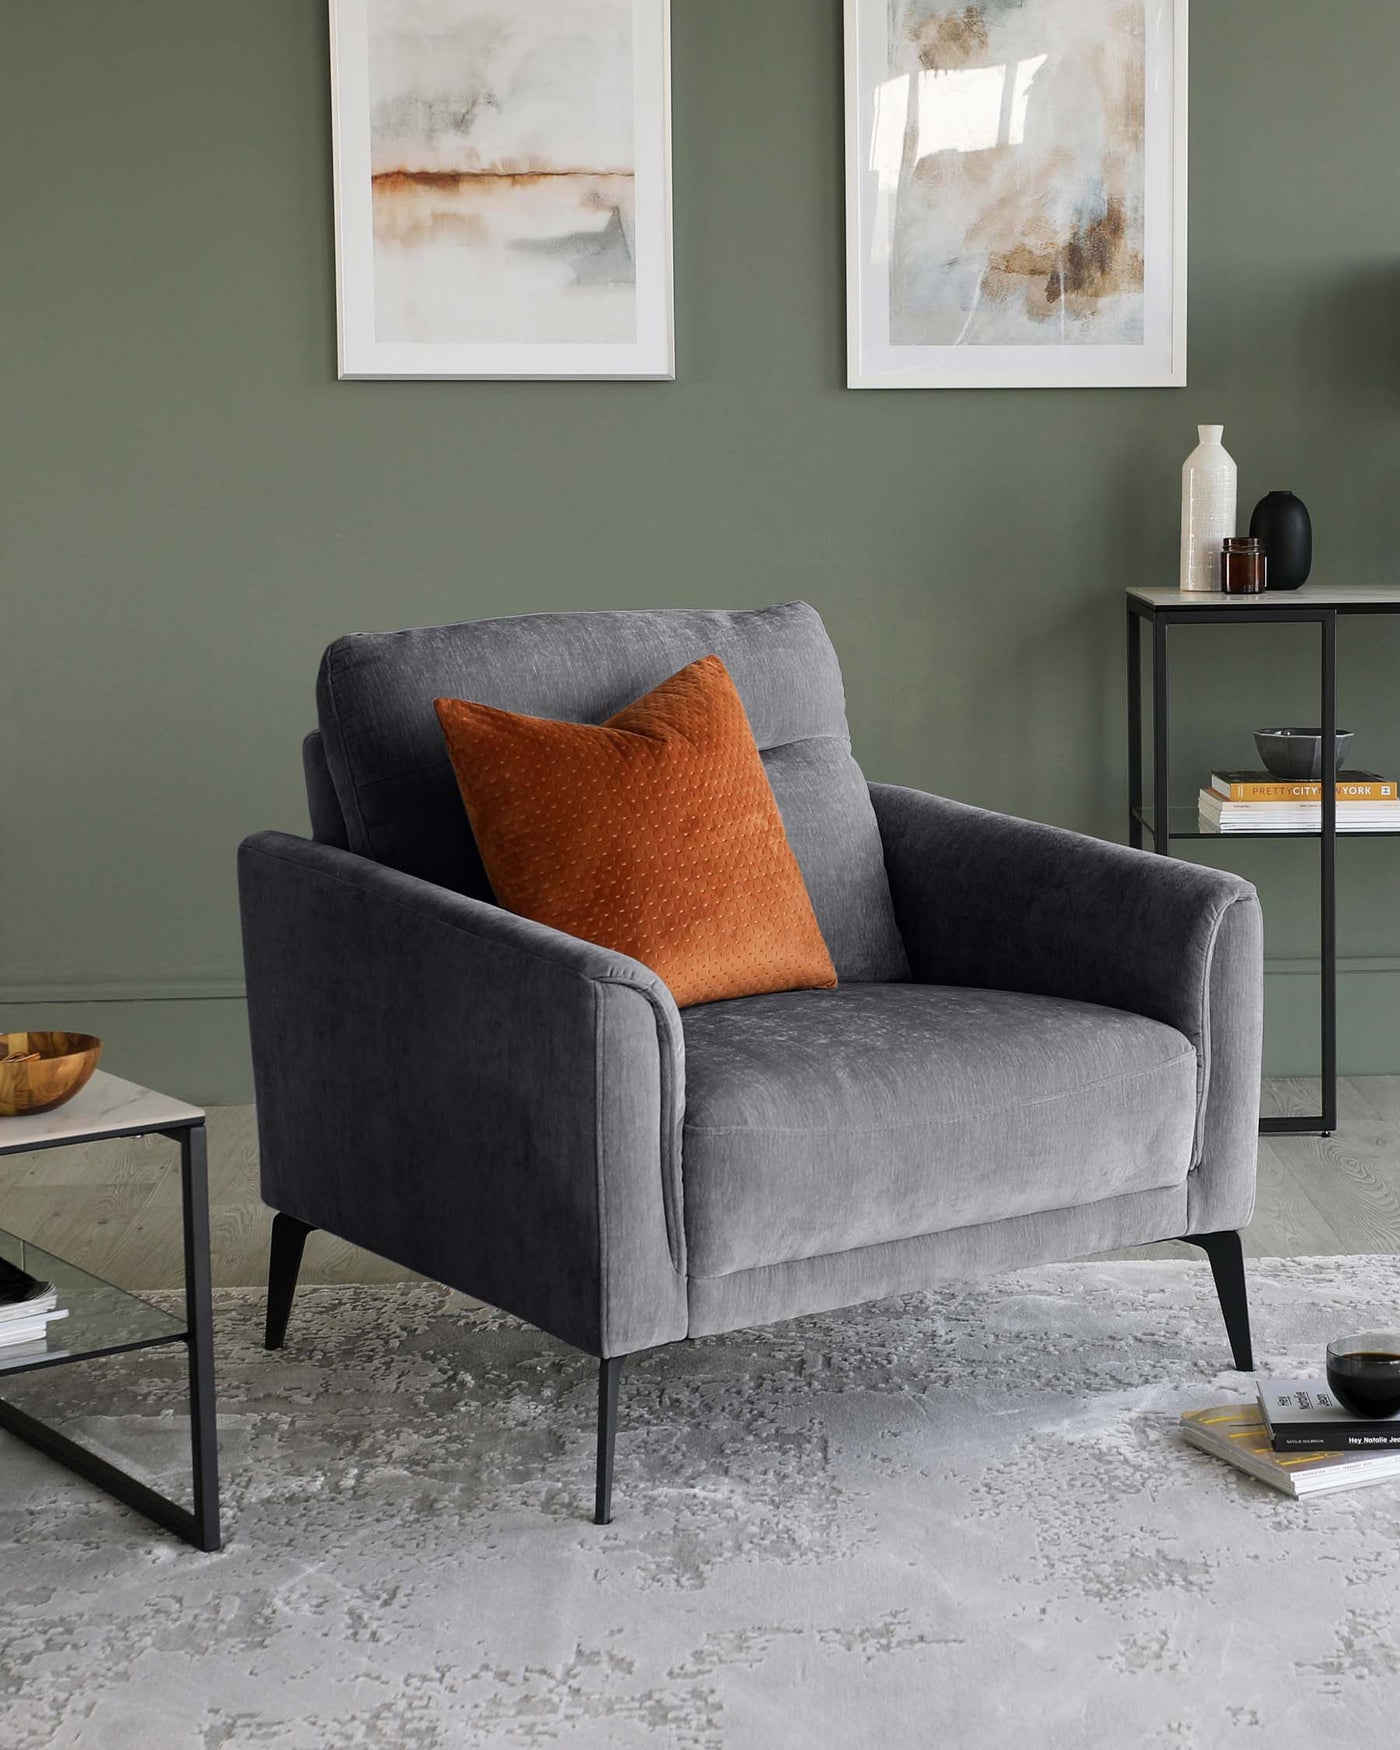 Elegant contemporary-style armchair with a smooth, grey upholstery and a single burnt orange textured throw pillow. The armchair features sleek lines, slightly flared armrests, and slender black metal legs. To the right, there's a minimalist black metal frame side table with a rectangular glass top, holding decorative items and books. The furniture is set against a muted green wall and atop a distressed grey area rug, complemented by abstract wall art.